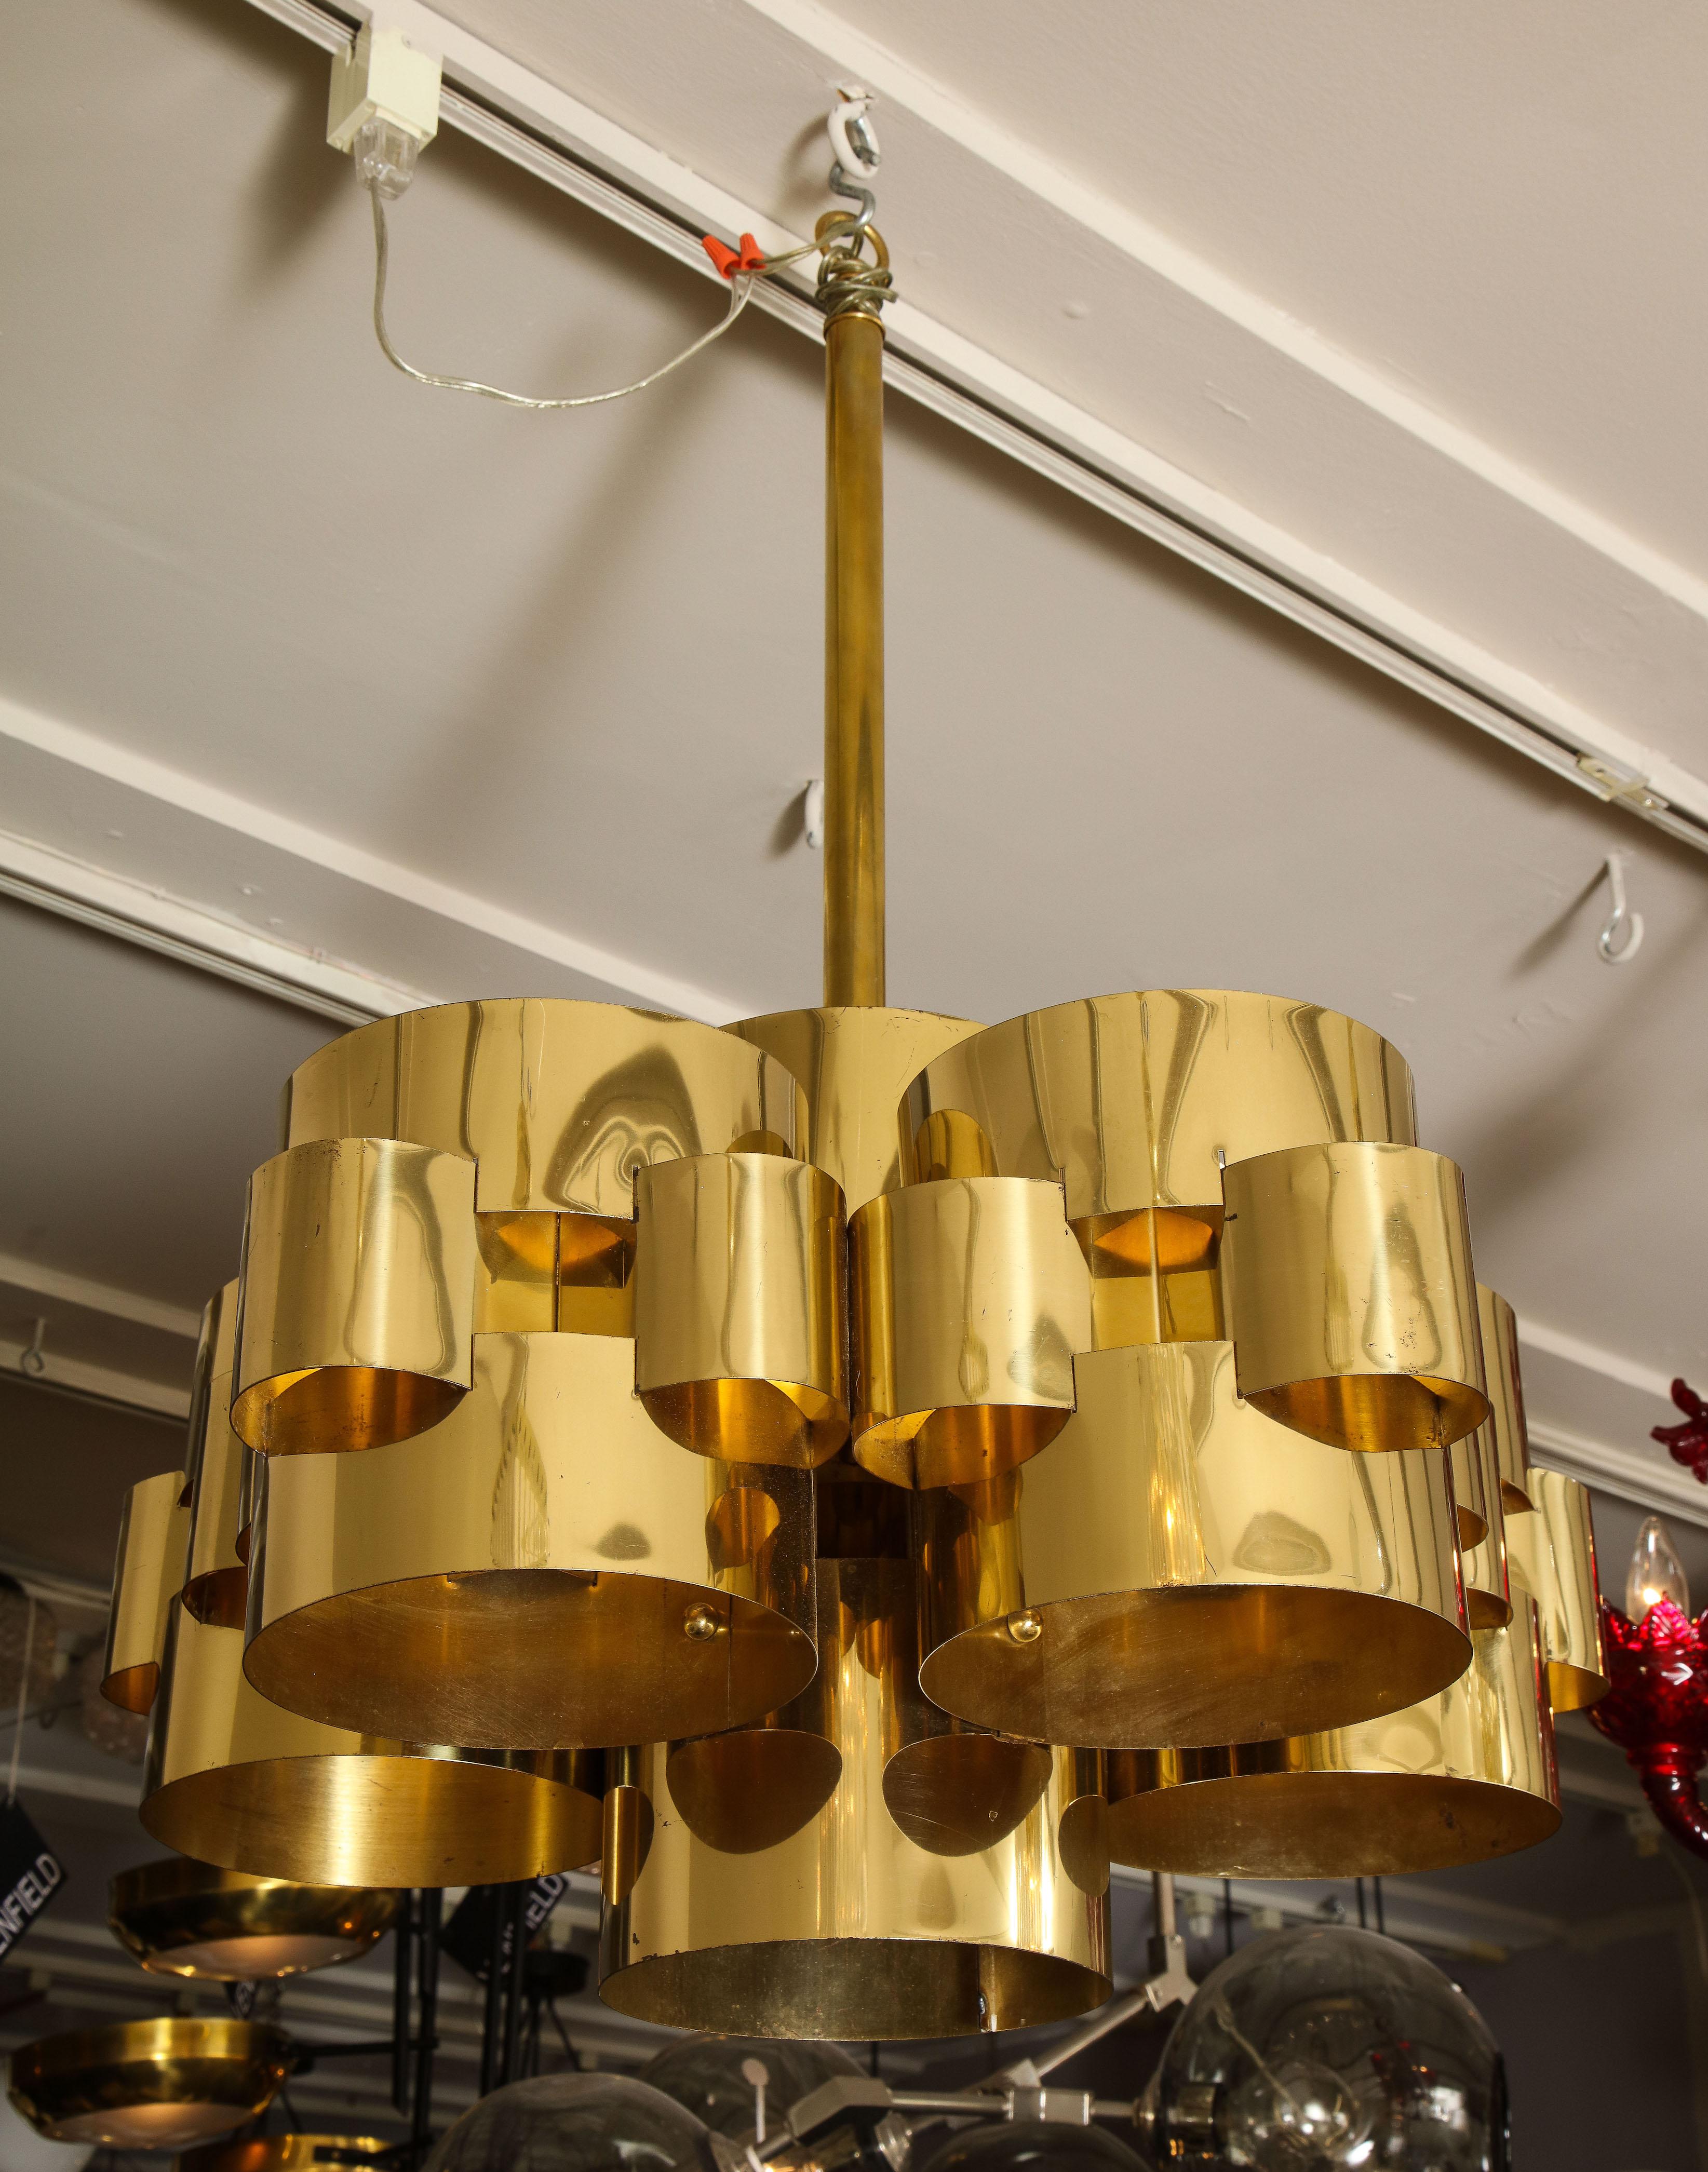 Vintage modernist Cloud chandelier in brass by Curtis Jere. The brass shades show some aging and fine scratches. It has 5 medium light sockets (E26).